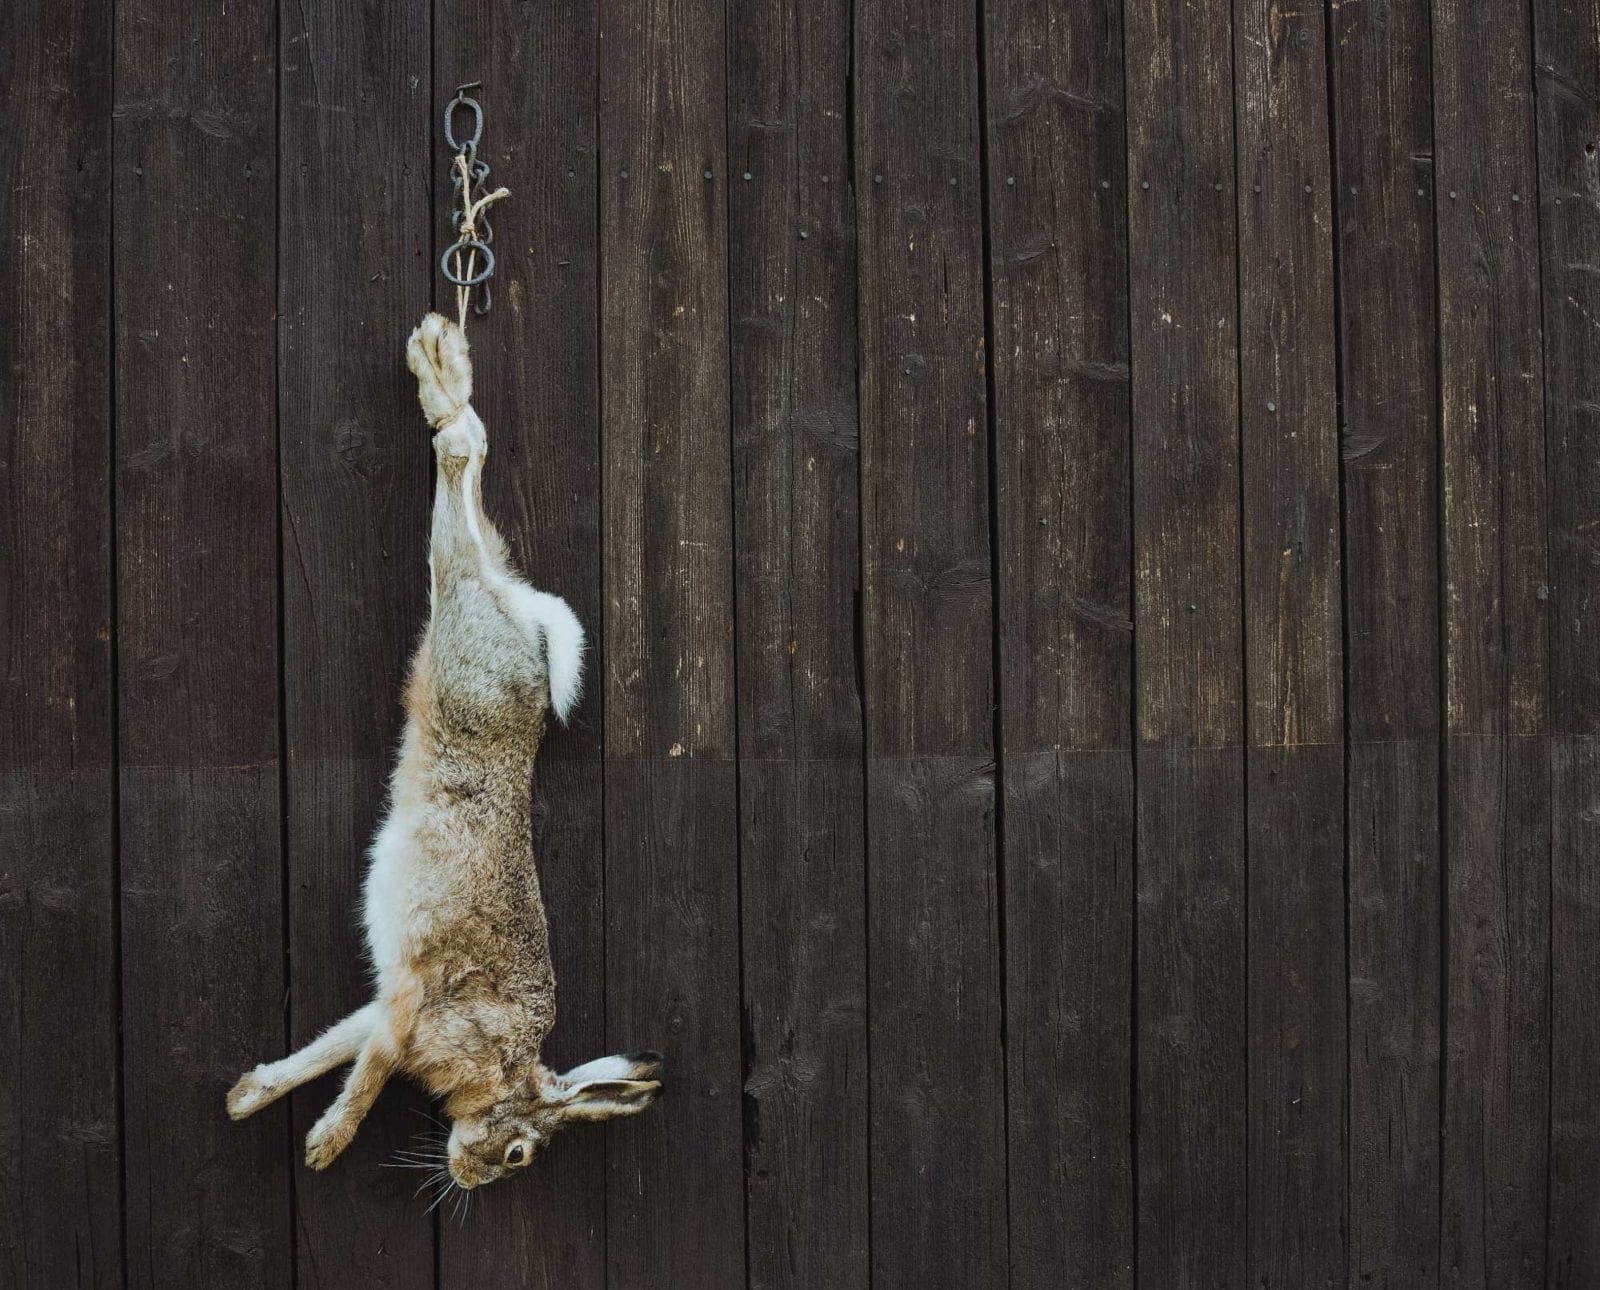 A rabbit hanging after a hunt for dinner.